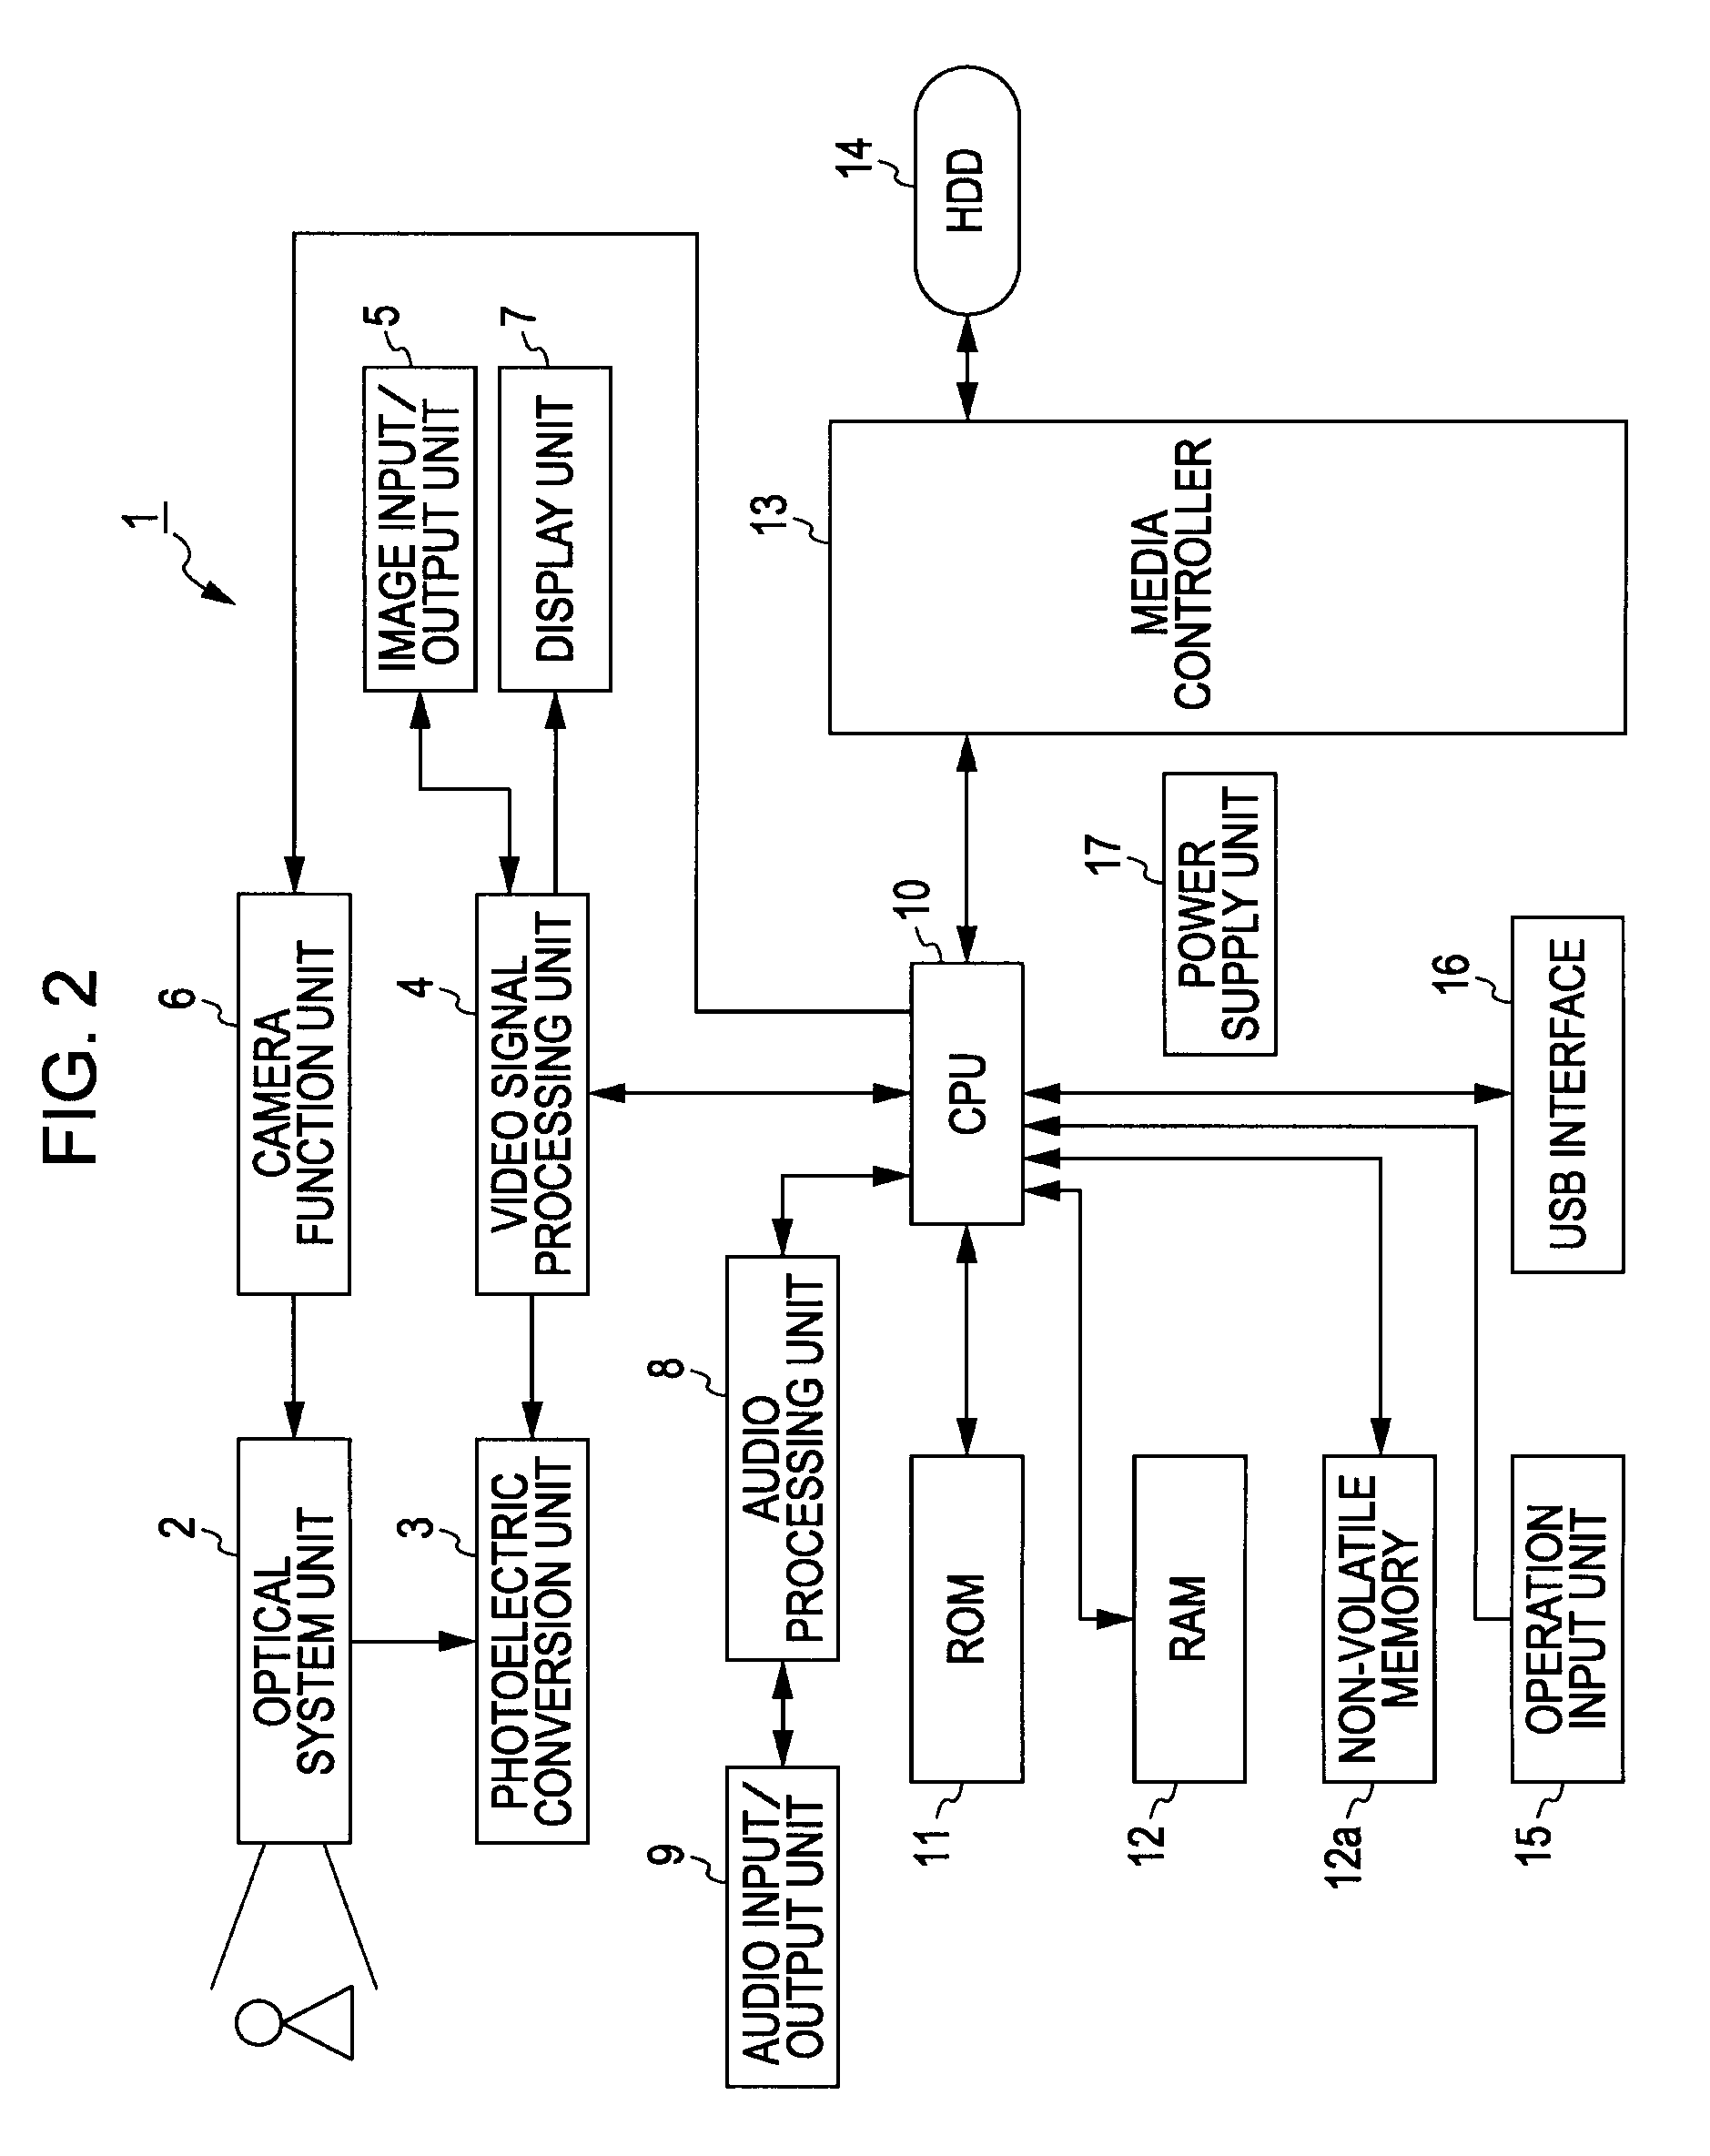 Imaging device, information processing device, information processing system, recording control method thereof, and program for causing a computer to execute the method